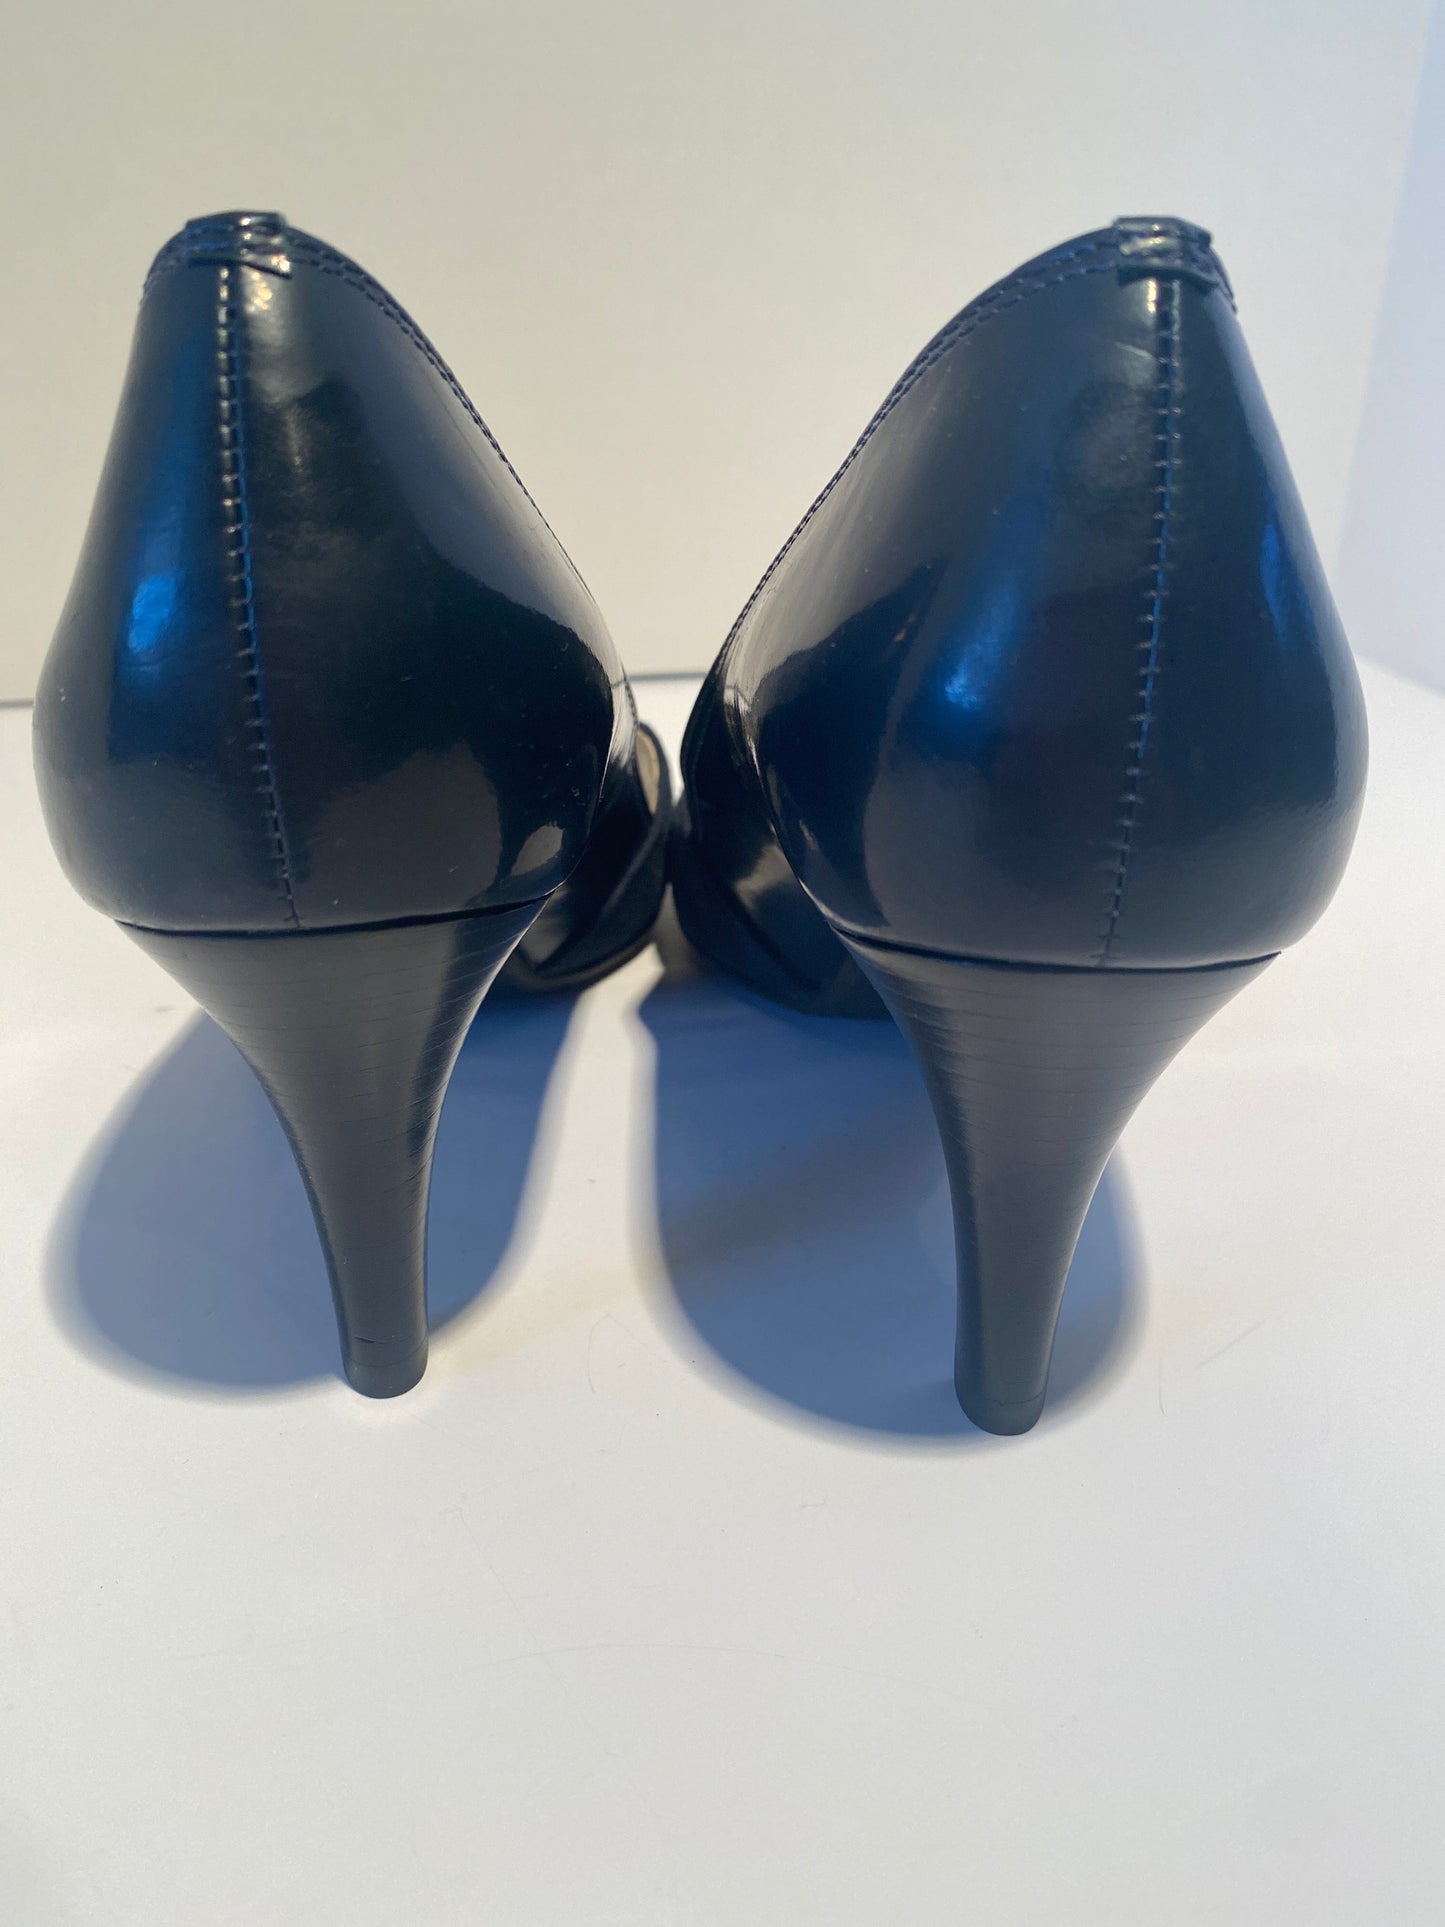 Shoes Heels Stiletto By Talbots  Size: 8